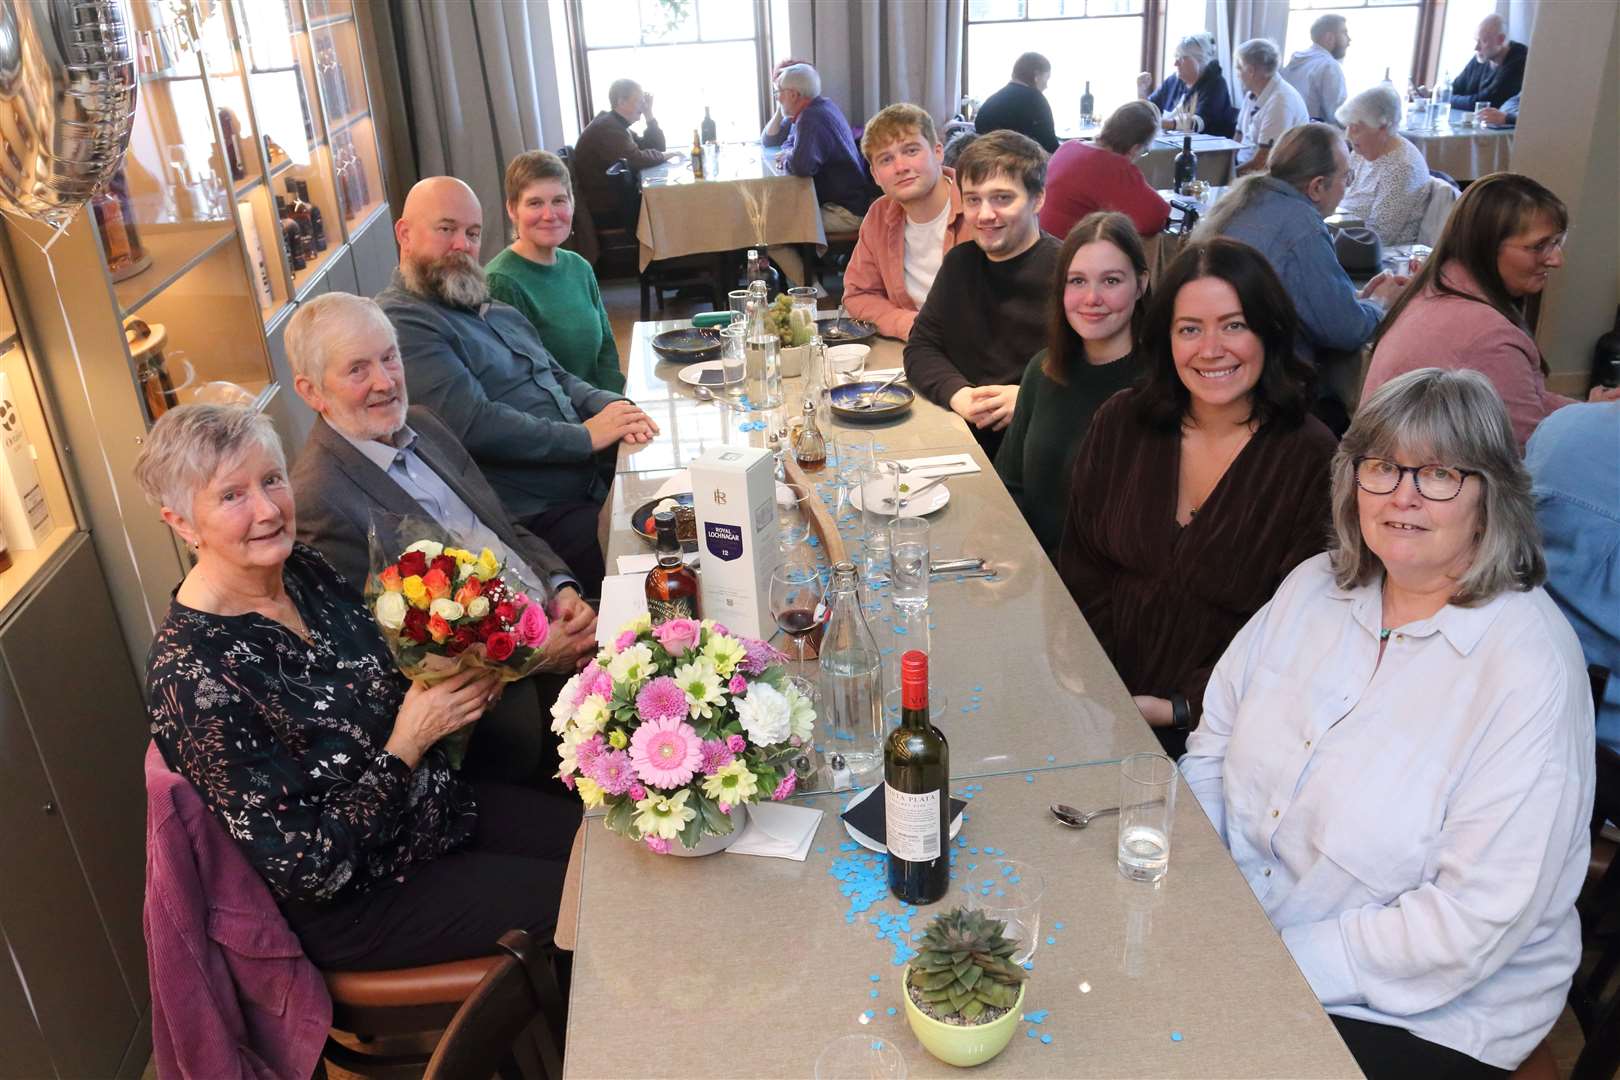 Noni and Douglas Pirie celebrate their 60th anniversary with family members in Huntly. Picture: David Porter